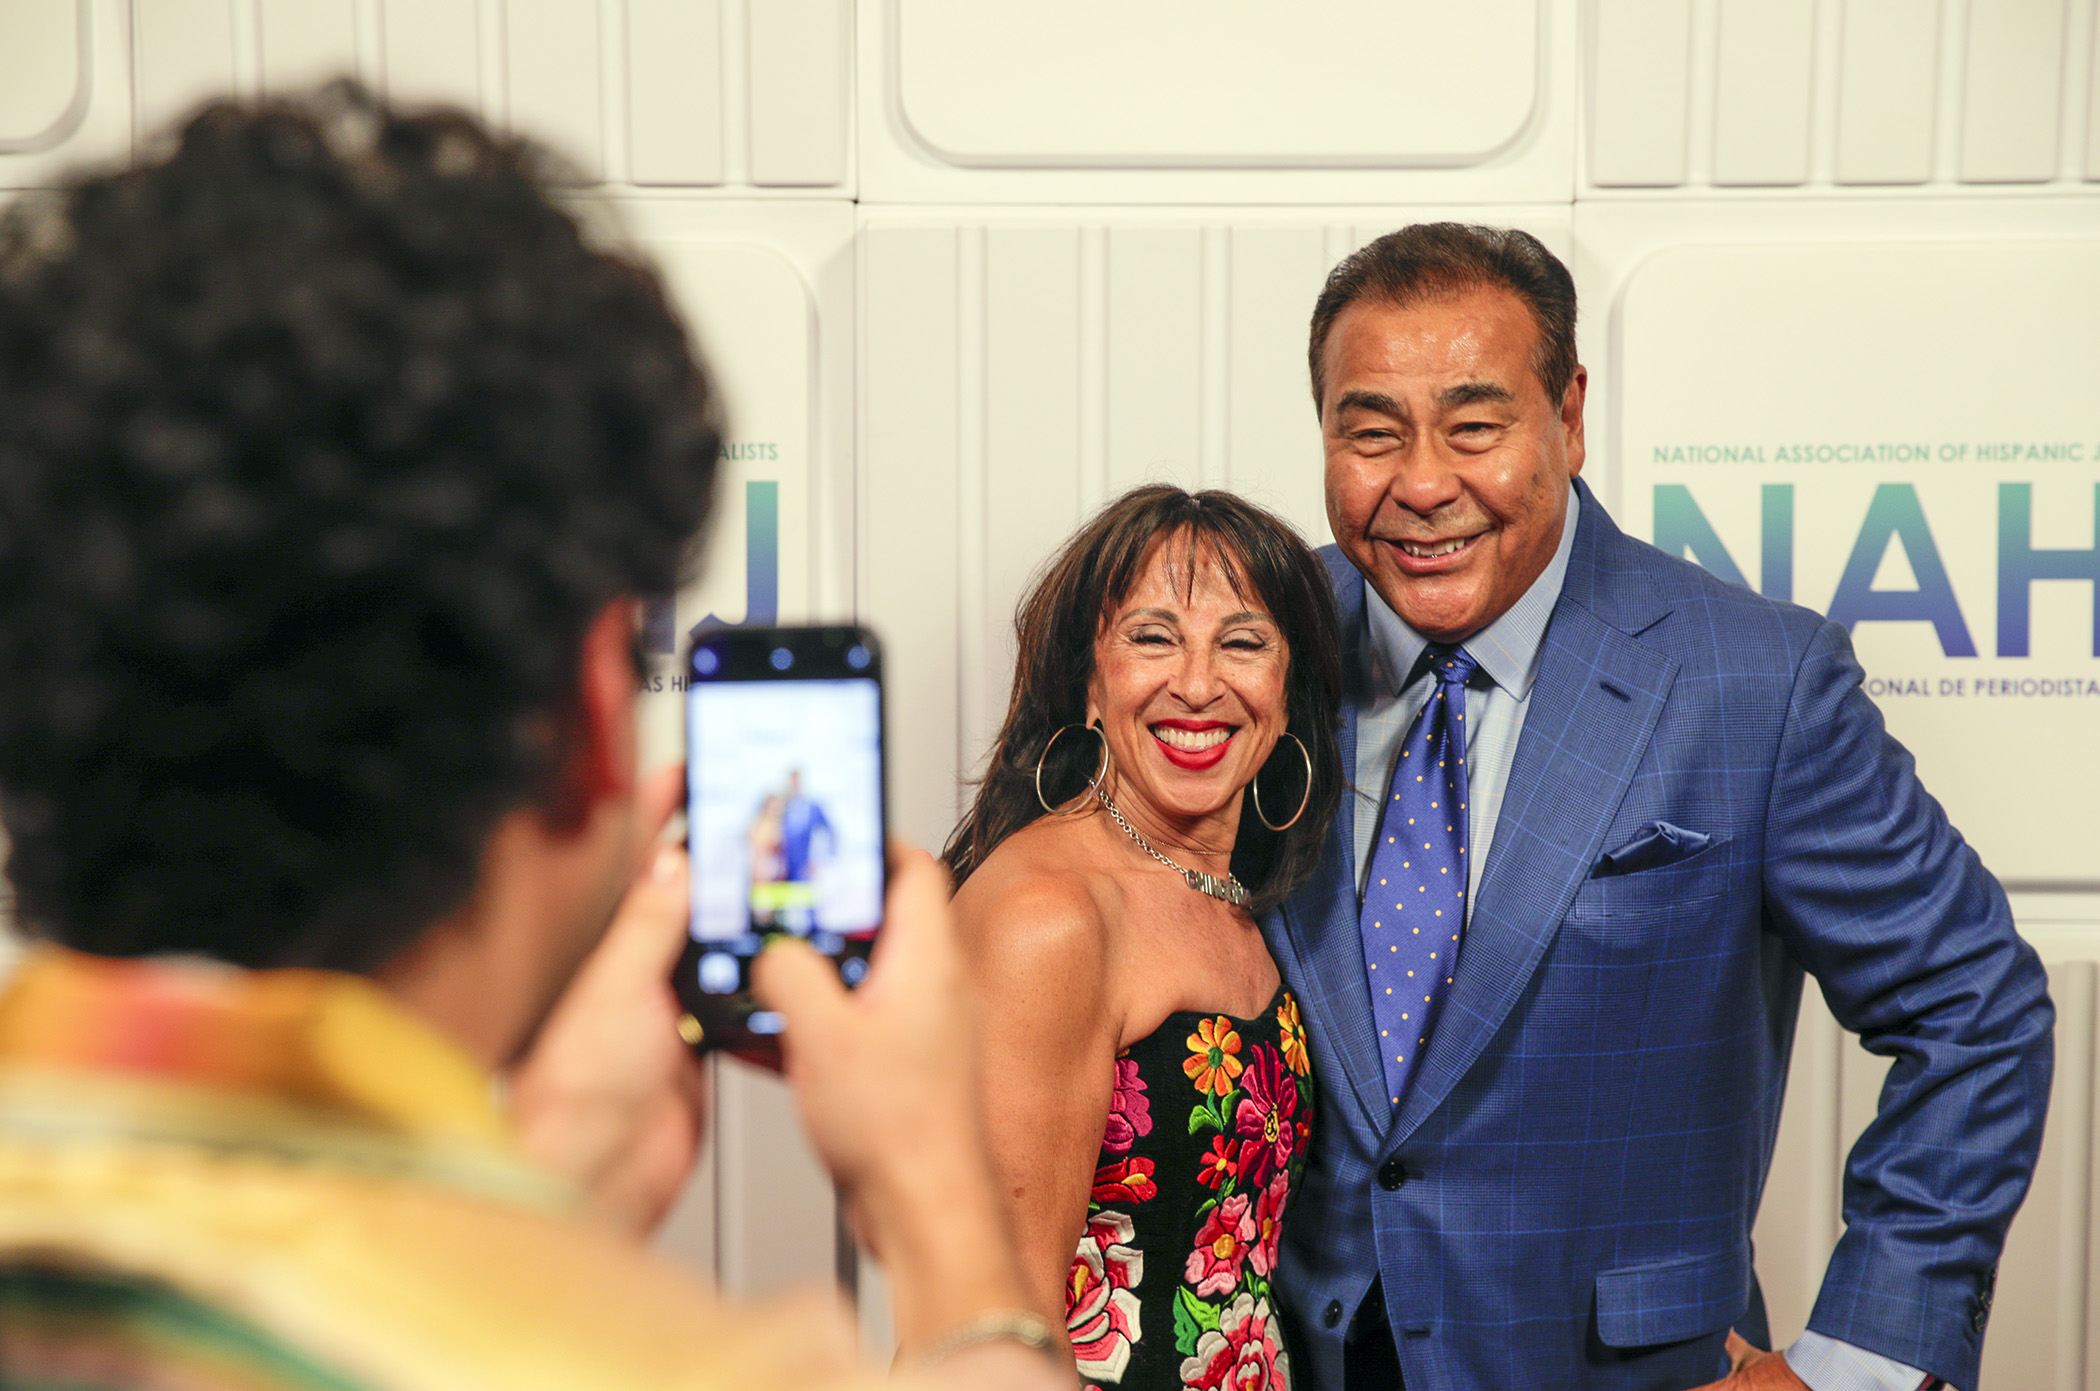 Maria Hinojosa and John Quiñones pose for a photo on the National Association of Hispanic Journalists Hall of Fame Gala red carpet in Las Vegas, Nev., on Saturday, August 5, 2022.